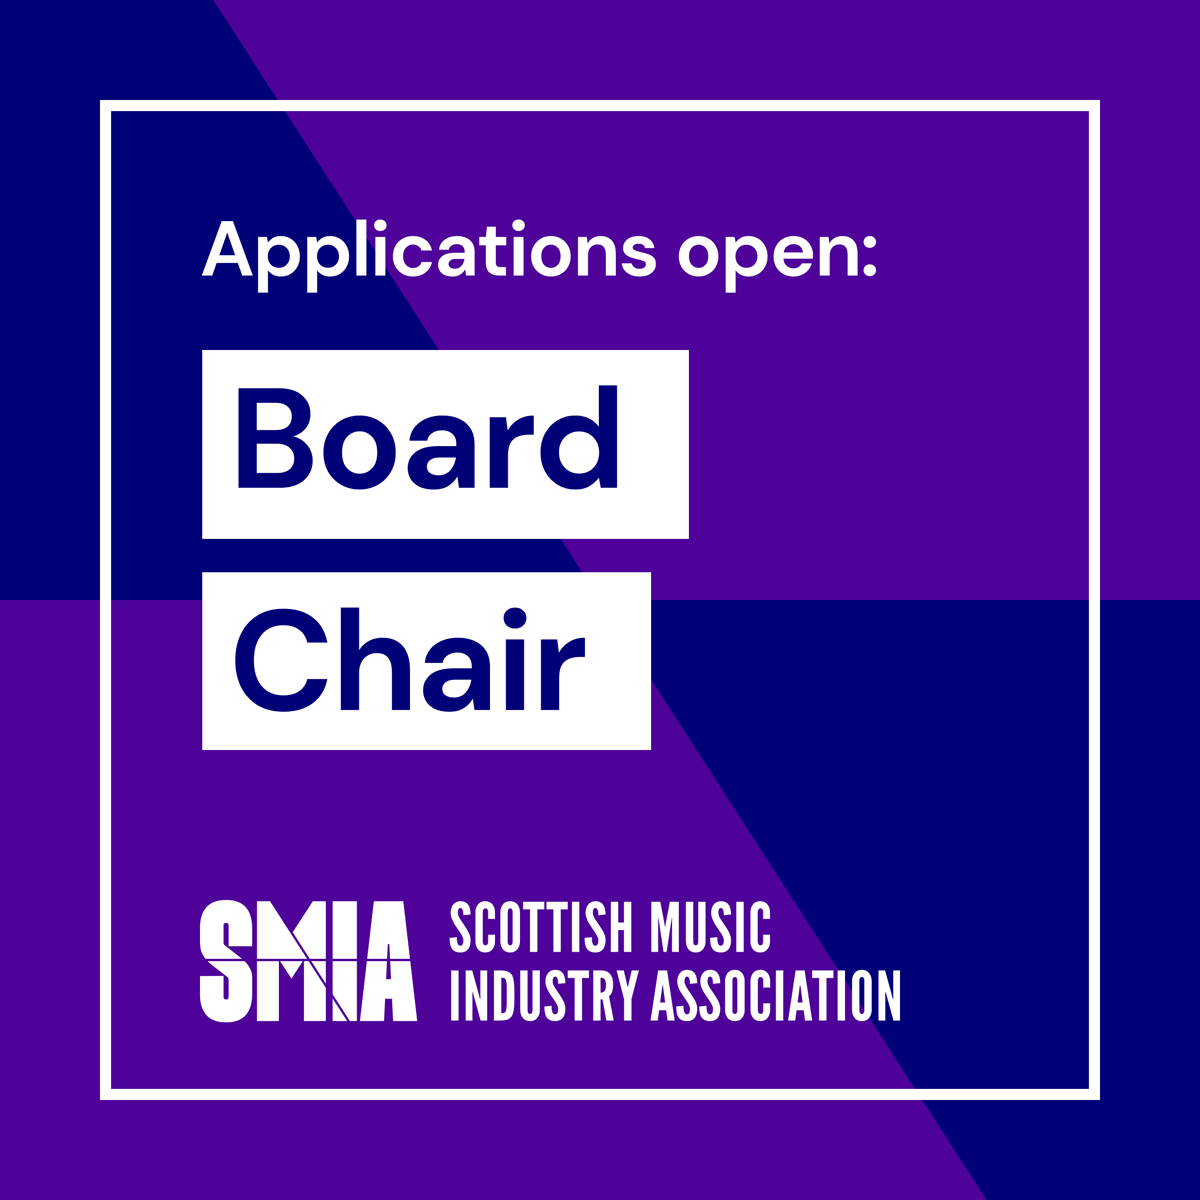 💡 OPPORTUNITY 💡 Applications are now open to become Chair of the Scottish Music Industry Association (SMIA). We're seeking a skilled music executive to lead our 15-strong Board and uplift Scotland's music sector. Deadline: 5pm Friday (15/09) 👇 bit.ly/3R3RUaL